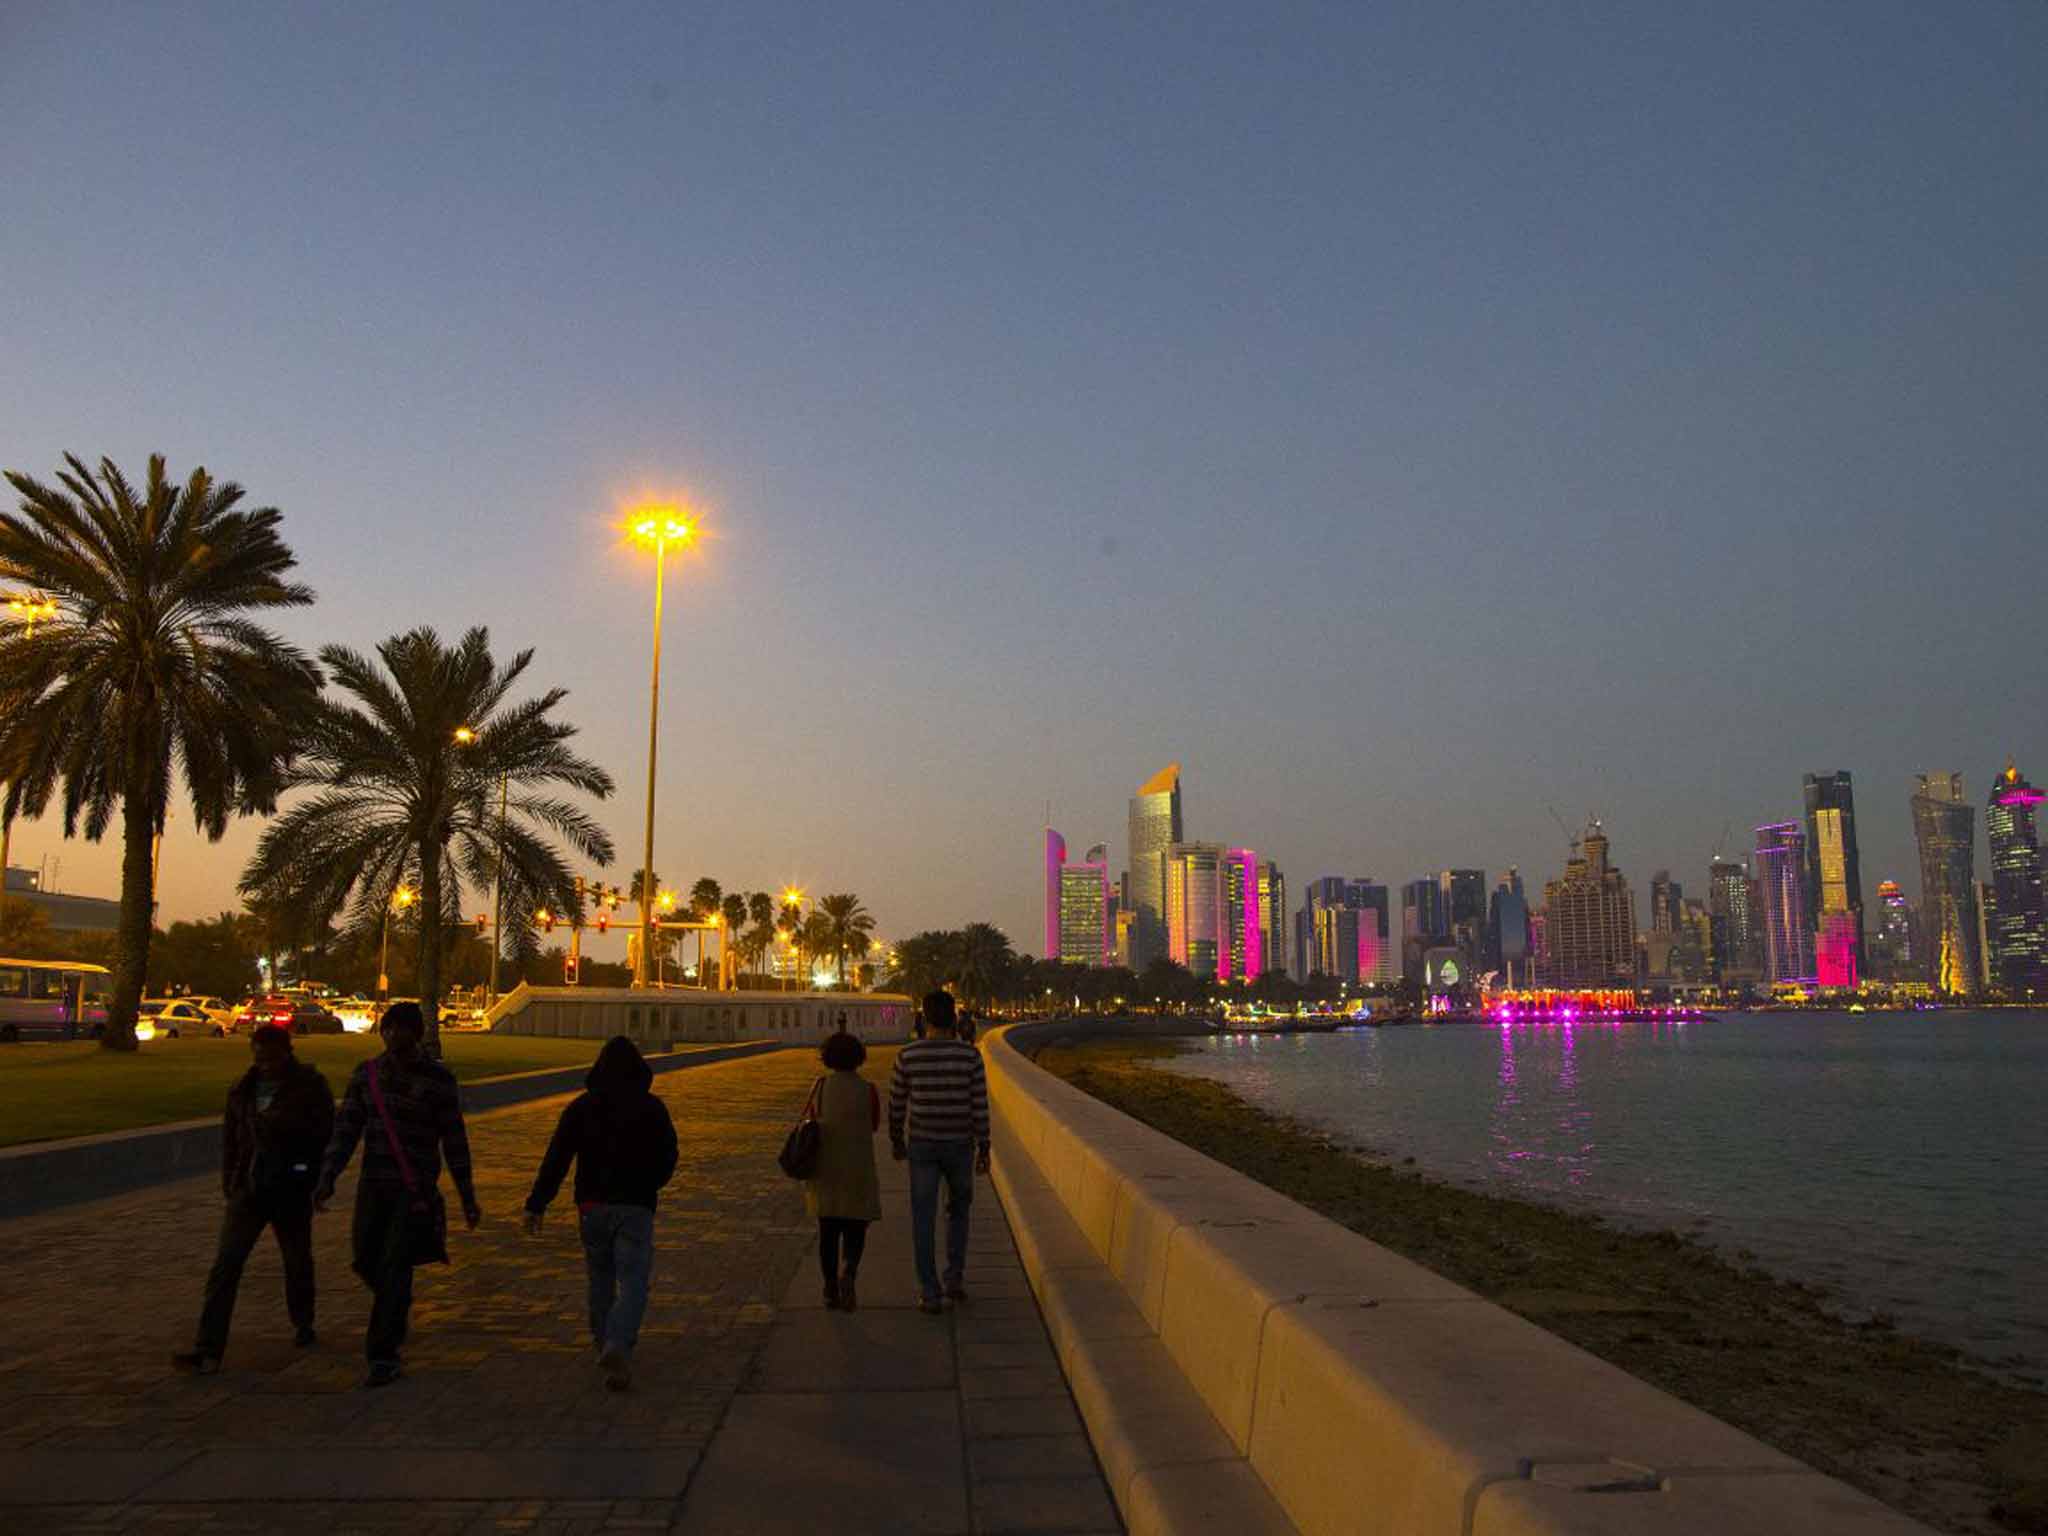 Traveling to or from Doha? Check this guide on what you can